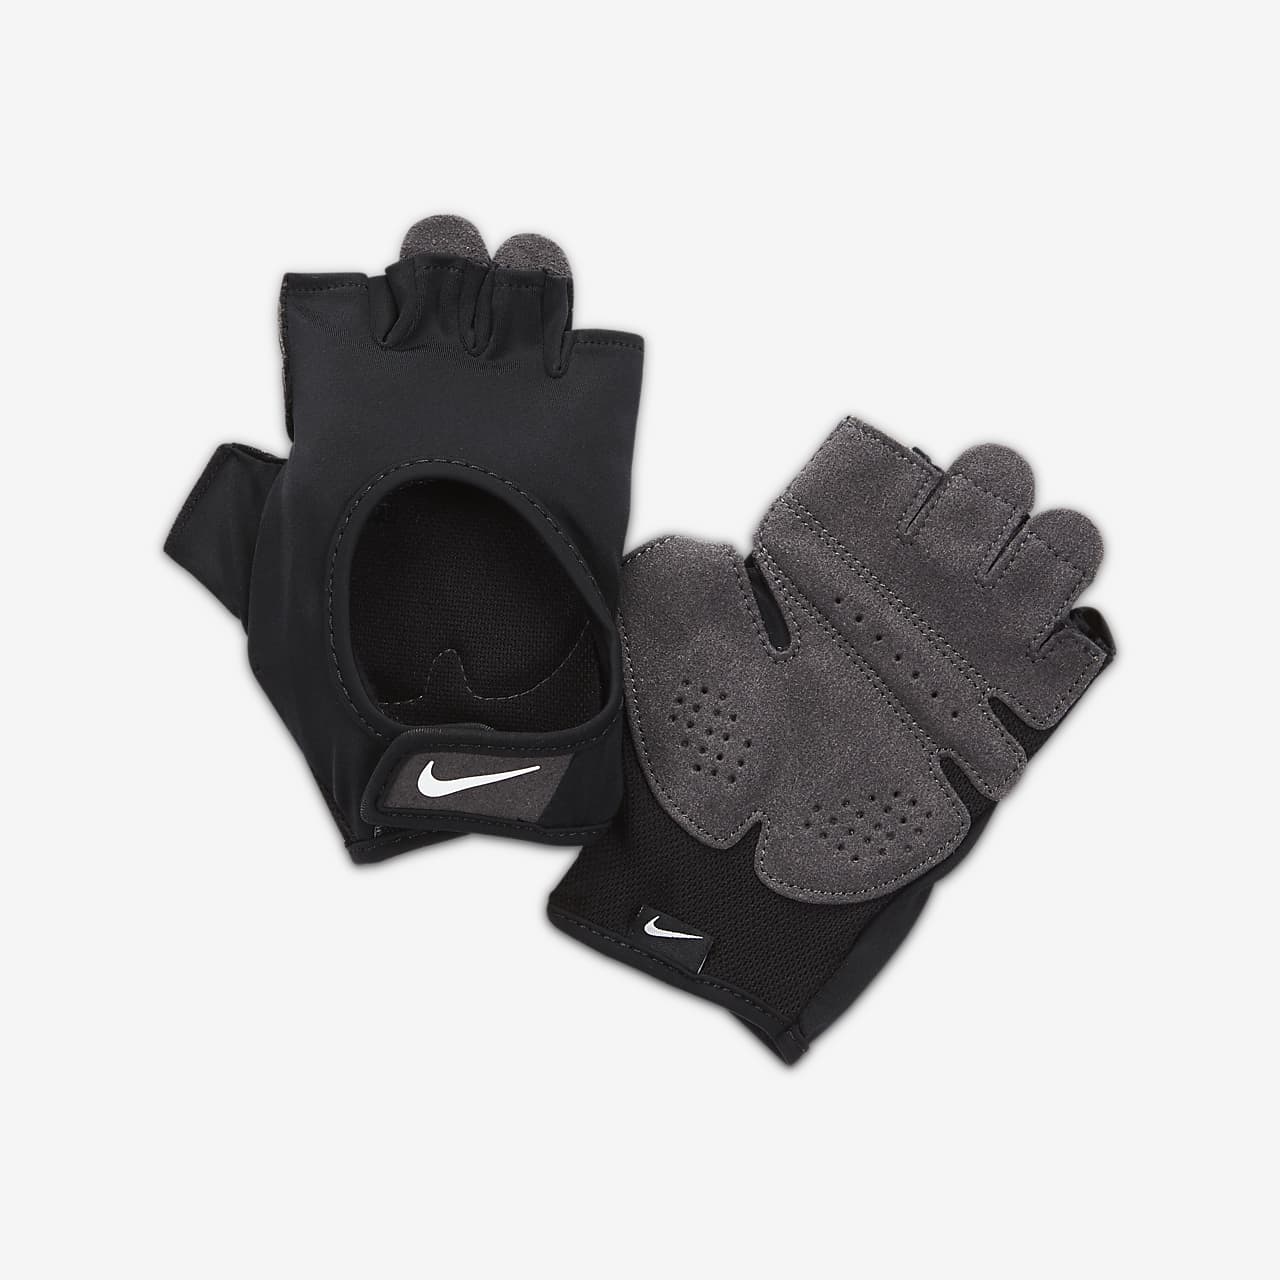 https://static.nike.com/a/images/t_PDP_1280_v1/f_auto/dc214d28-3ebf-405a-9b2e-a3fb0785a565/ultimate-weightlifting-gloves-wlwpHj.png